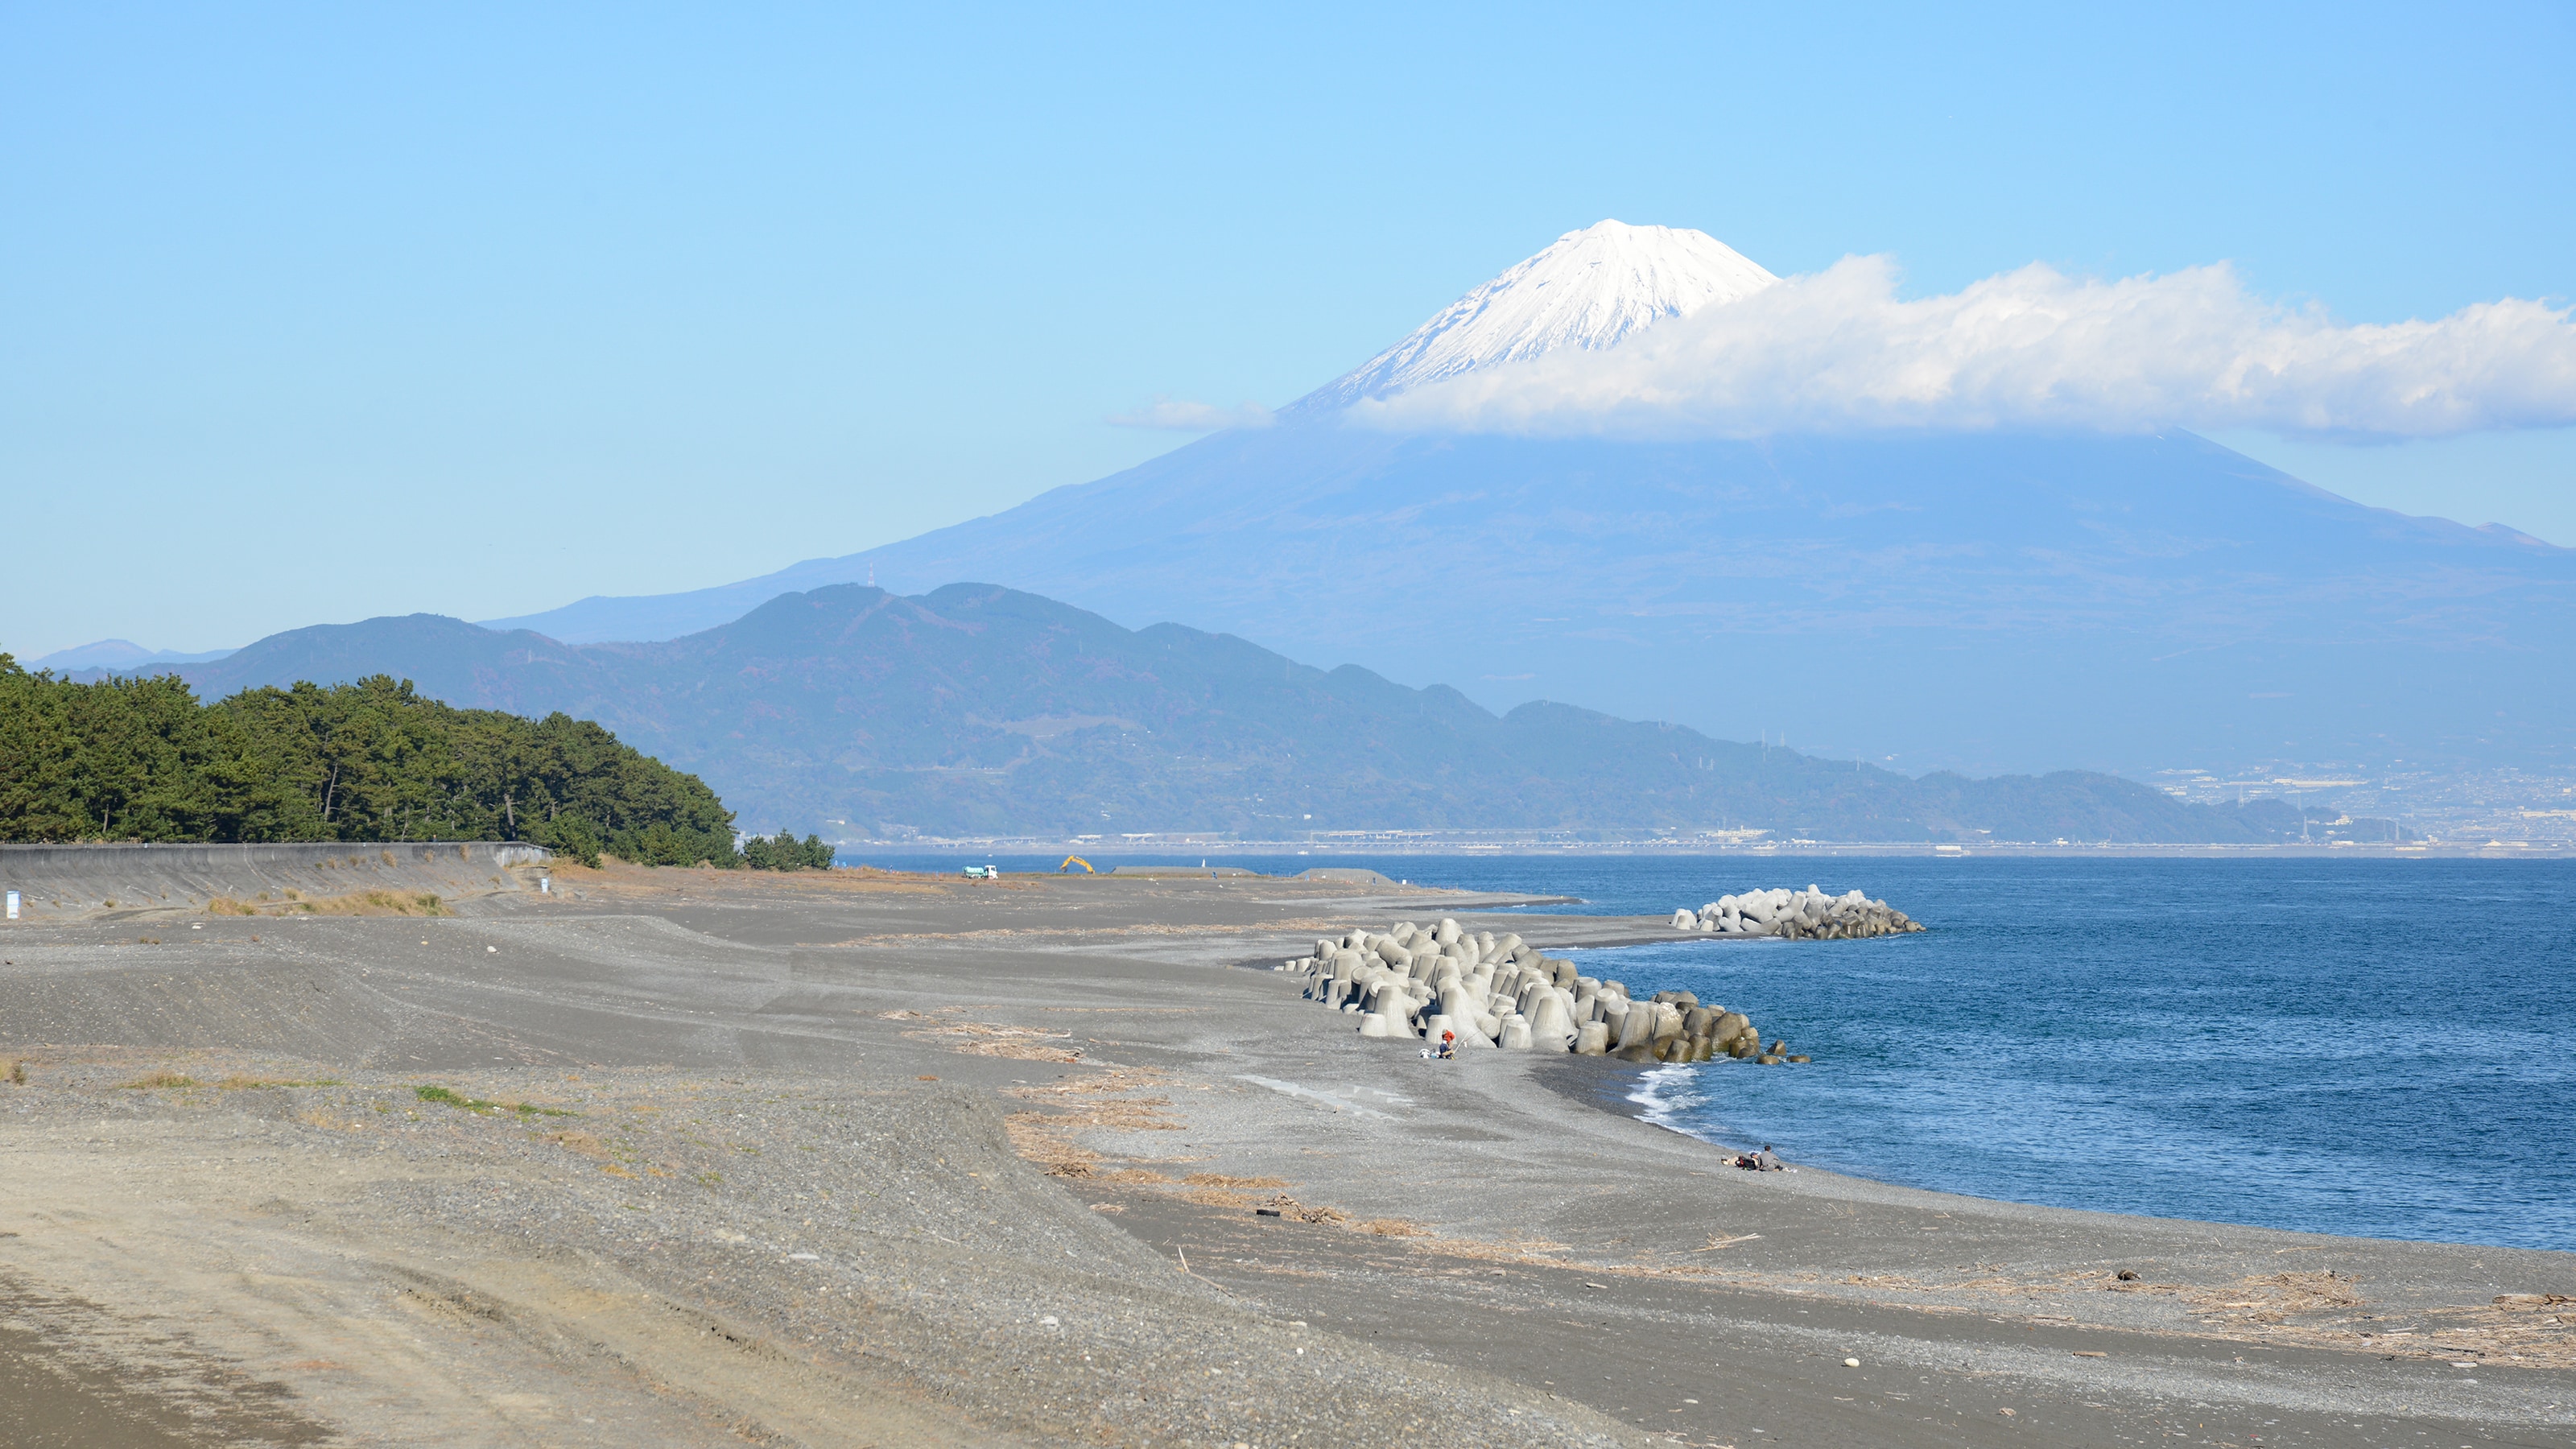 ** [Around / Kamagasaki] Shooting spot where you can see pine trees and Mt. Fuji / 10 minutes walk along the promenade from the hotel